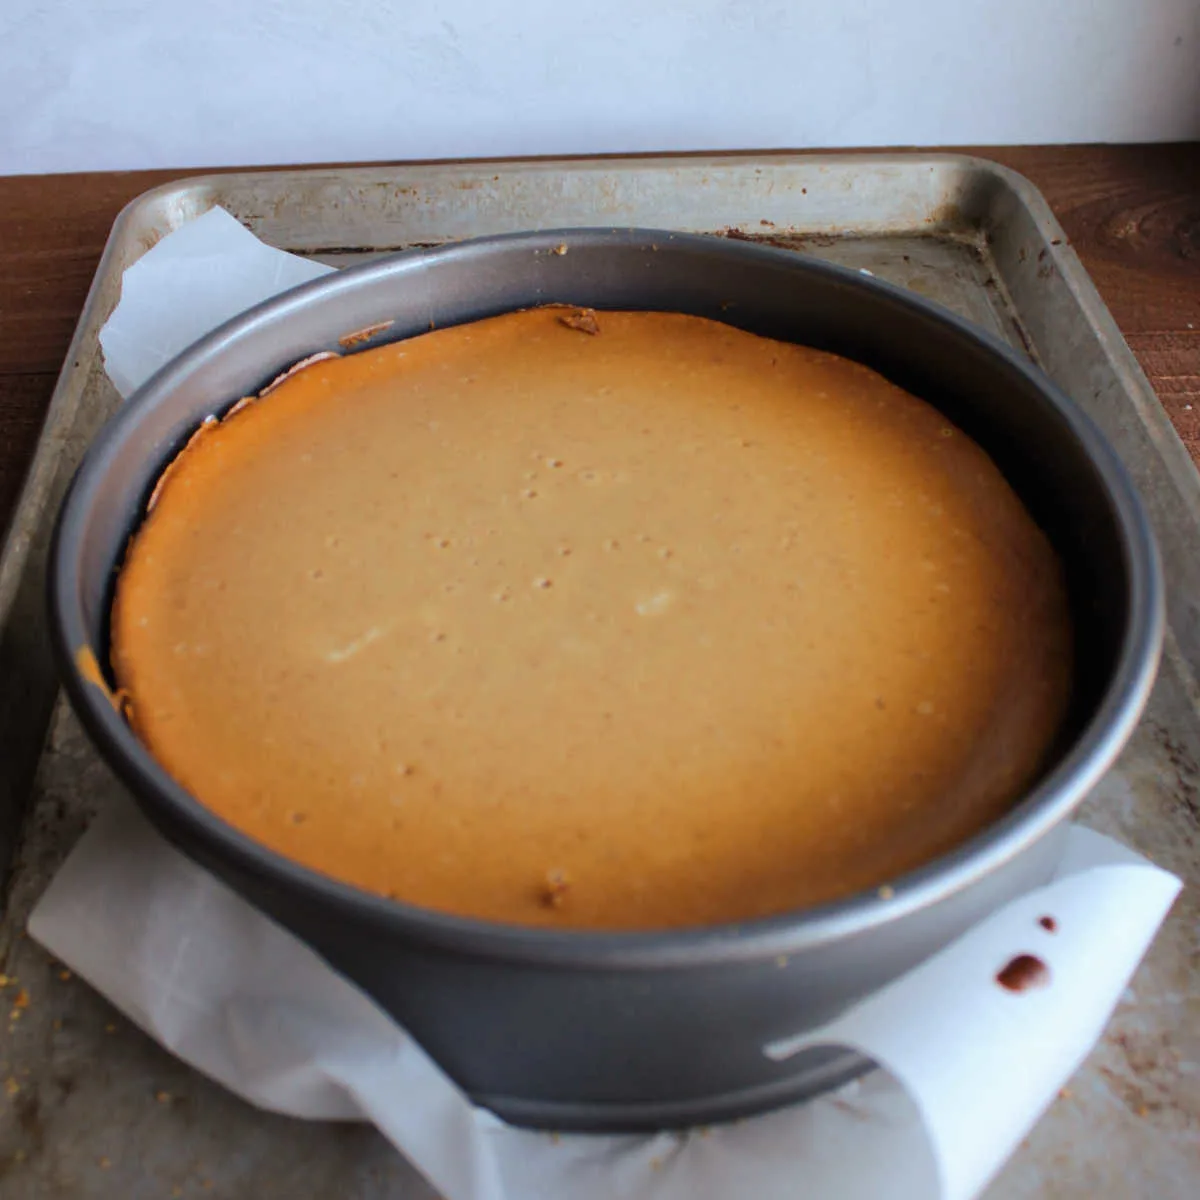 Golden brown apple butter cheesecake in springform pan fresh from the oven.